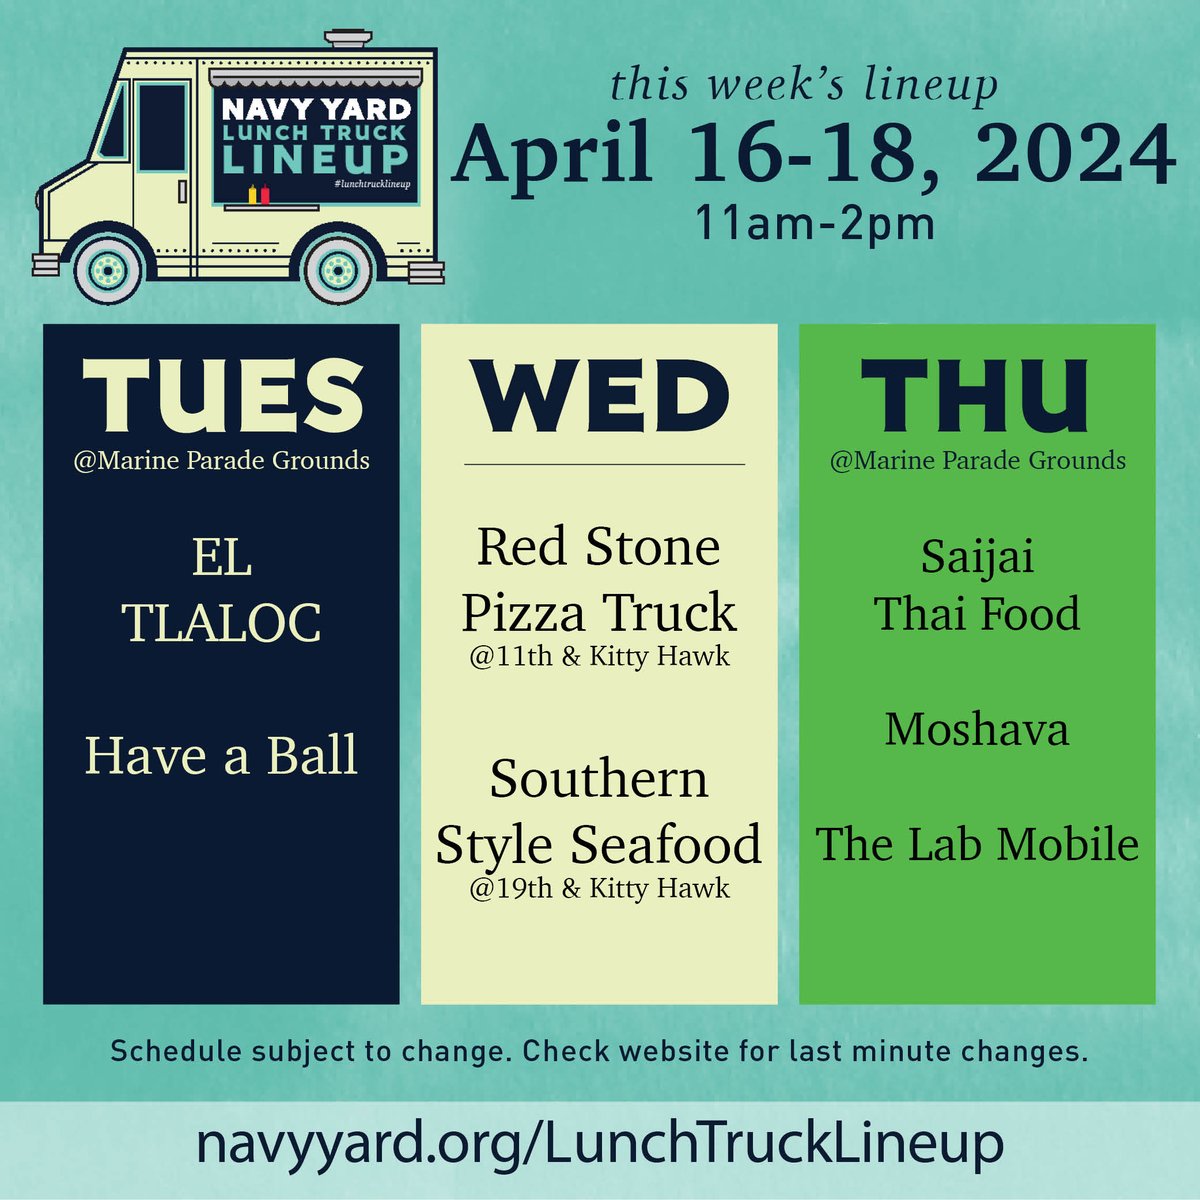 We have a great lineup for you this week! Check it out! #navyyardeats #lunchtrucklineup #discovertheyard #navyyardphilly